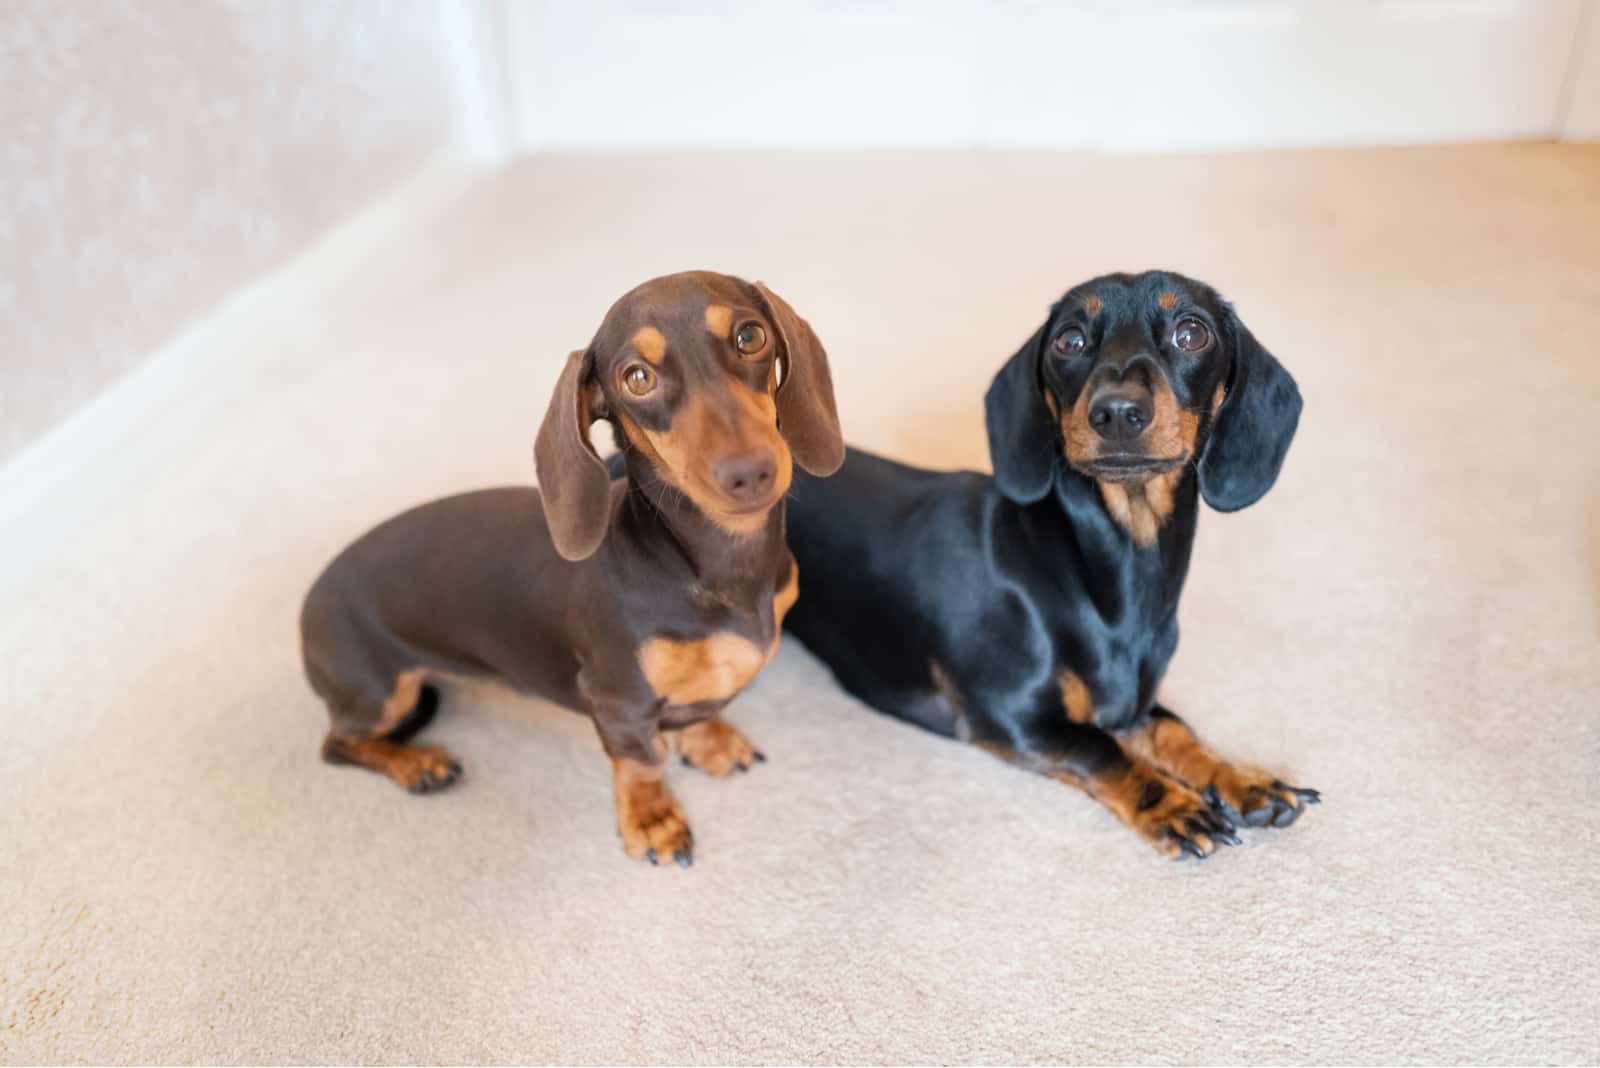 Two adorable miniature dachshunds on cream carpet